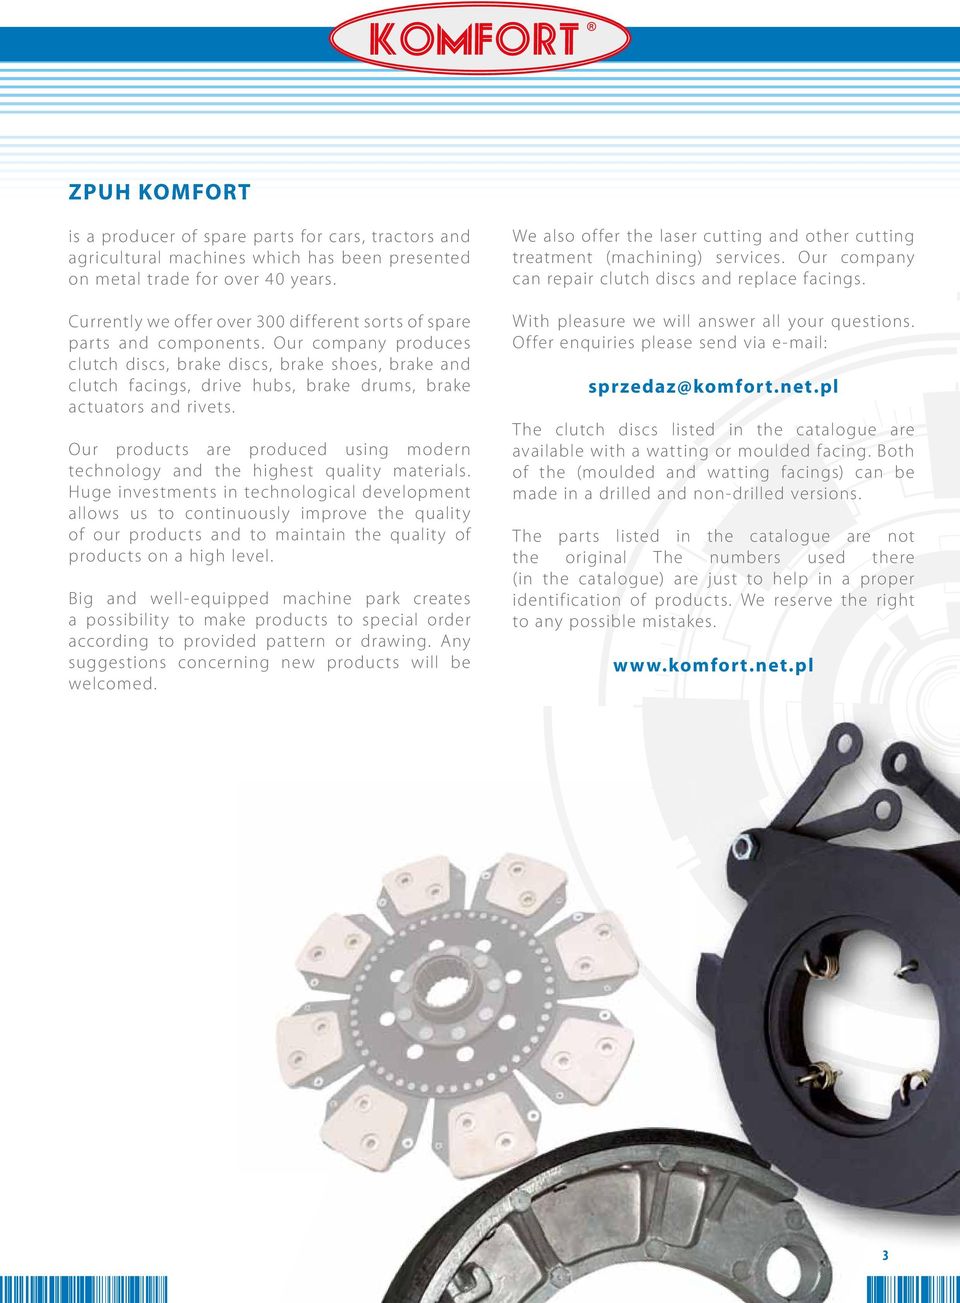 Our company produces clutch discs, brake discs, brake shoes, brake and clutch facings, drive hubs, brake drums, brake actuators and rivets.